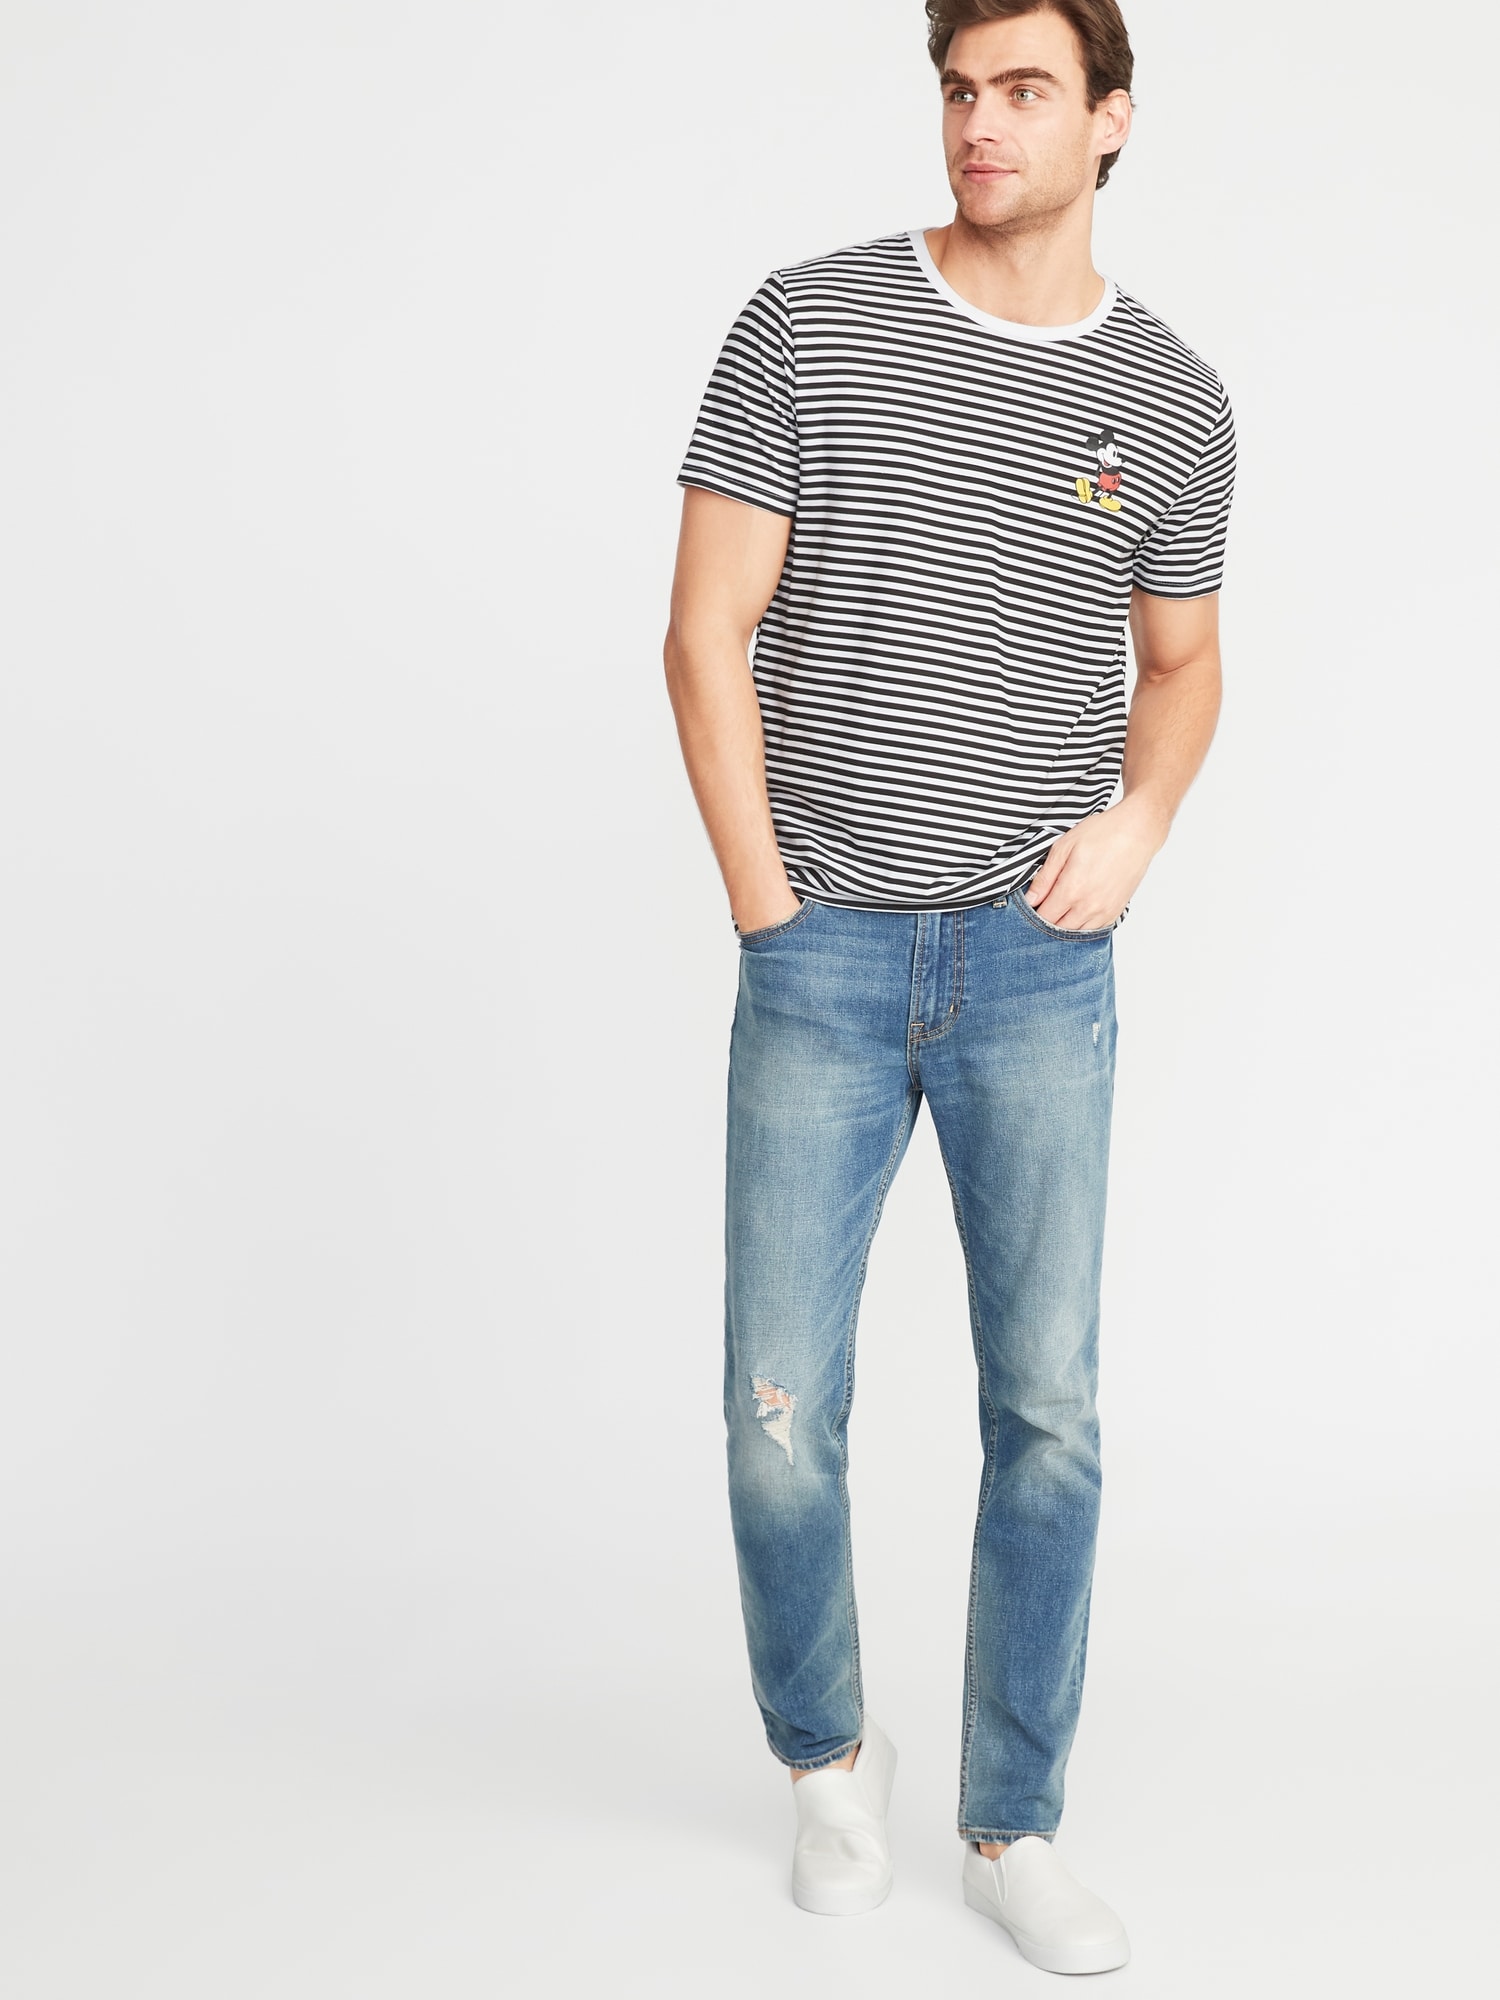 Disney© Mickey Mouse Striped Tee for Men | Old Navy